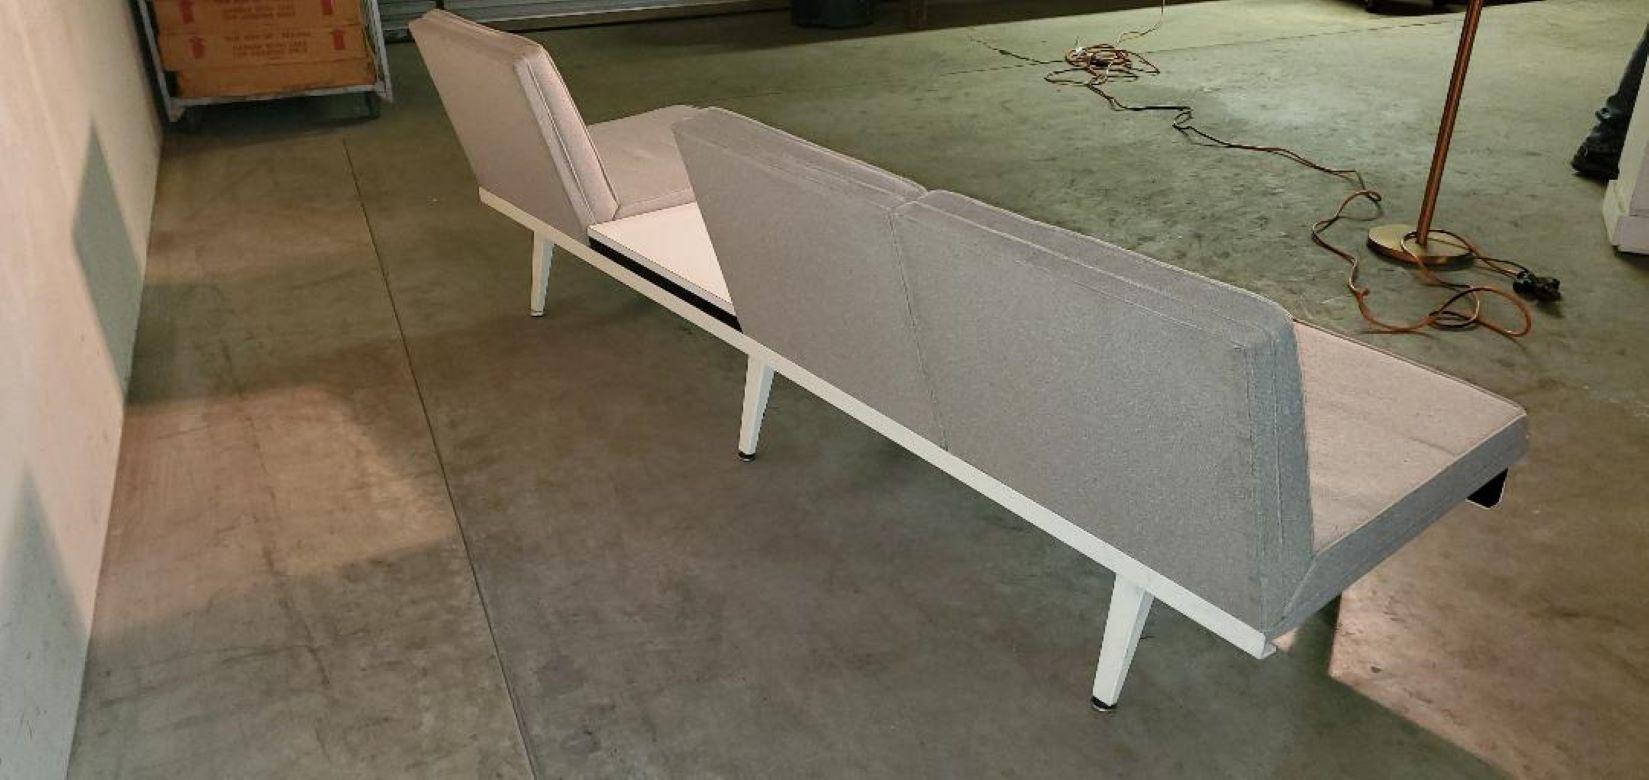 1950s George Nelson Steel Frame Sofa by Herman Miller Vintage Mid-Century Modern In Good Condition For Sale In Monrovia, CA